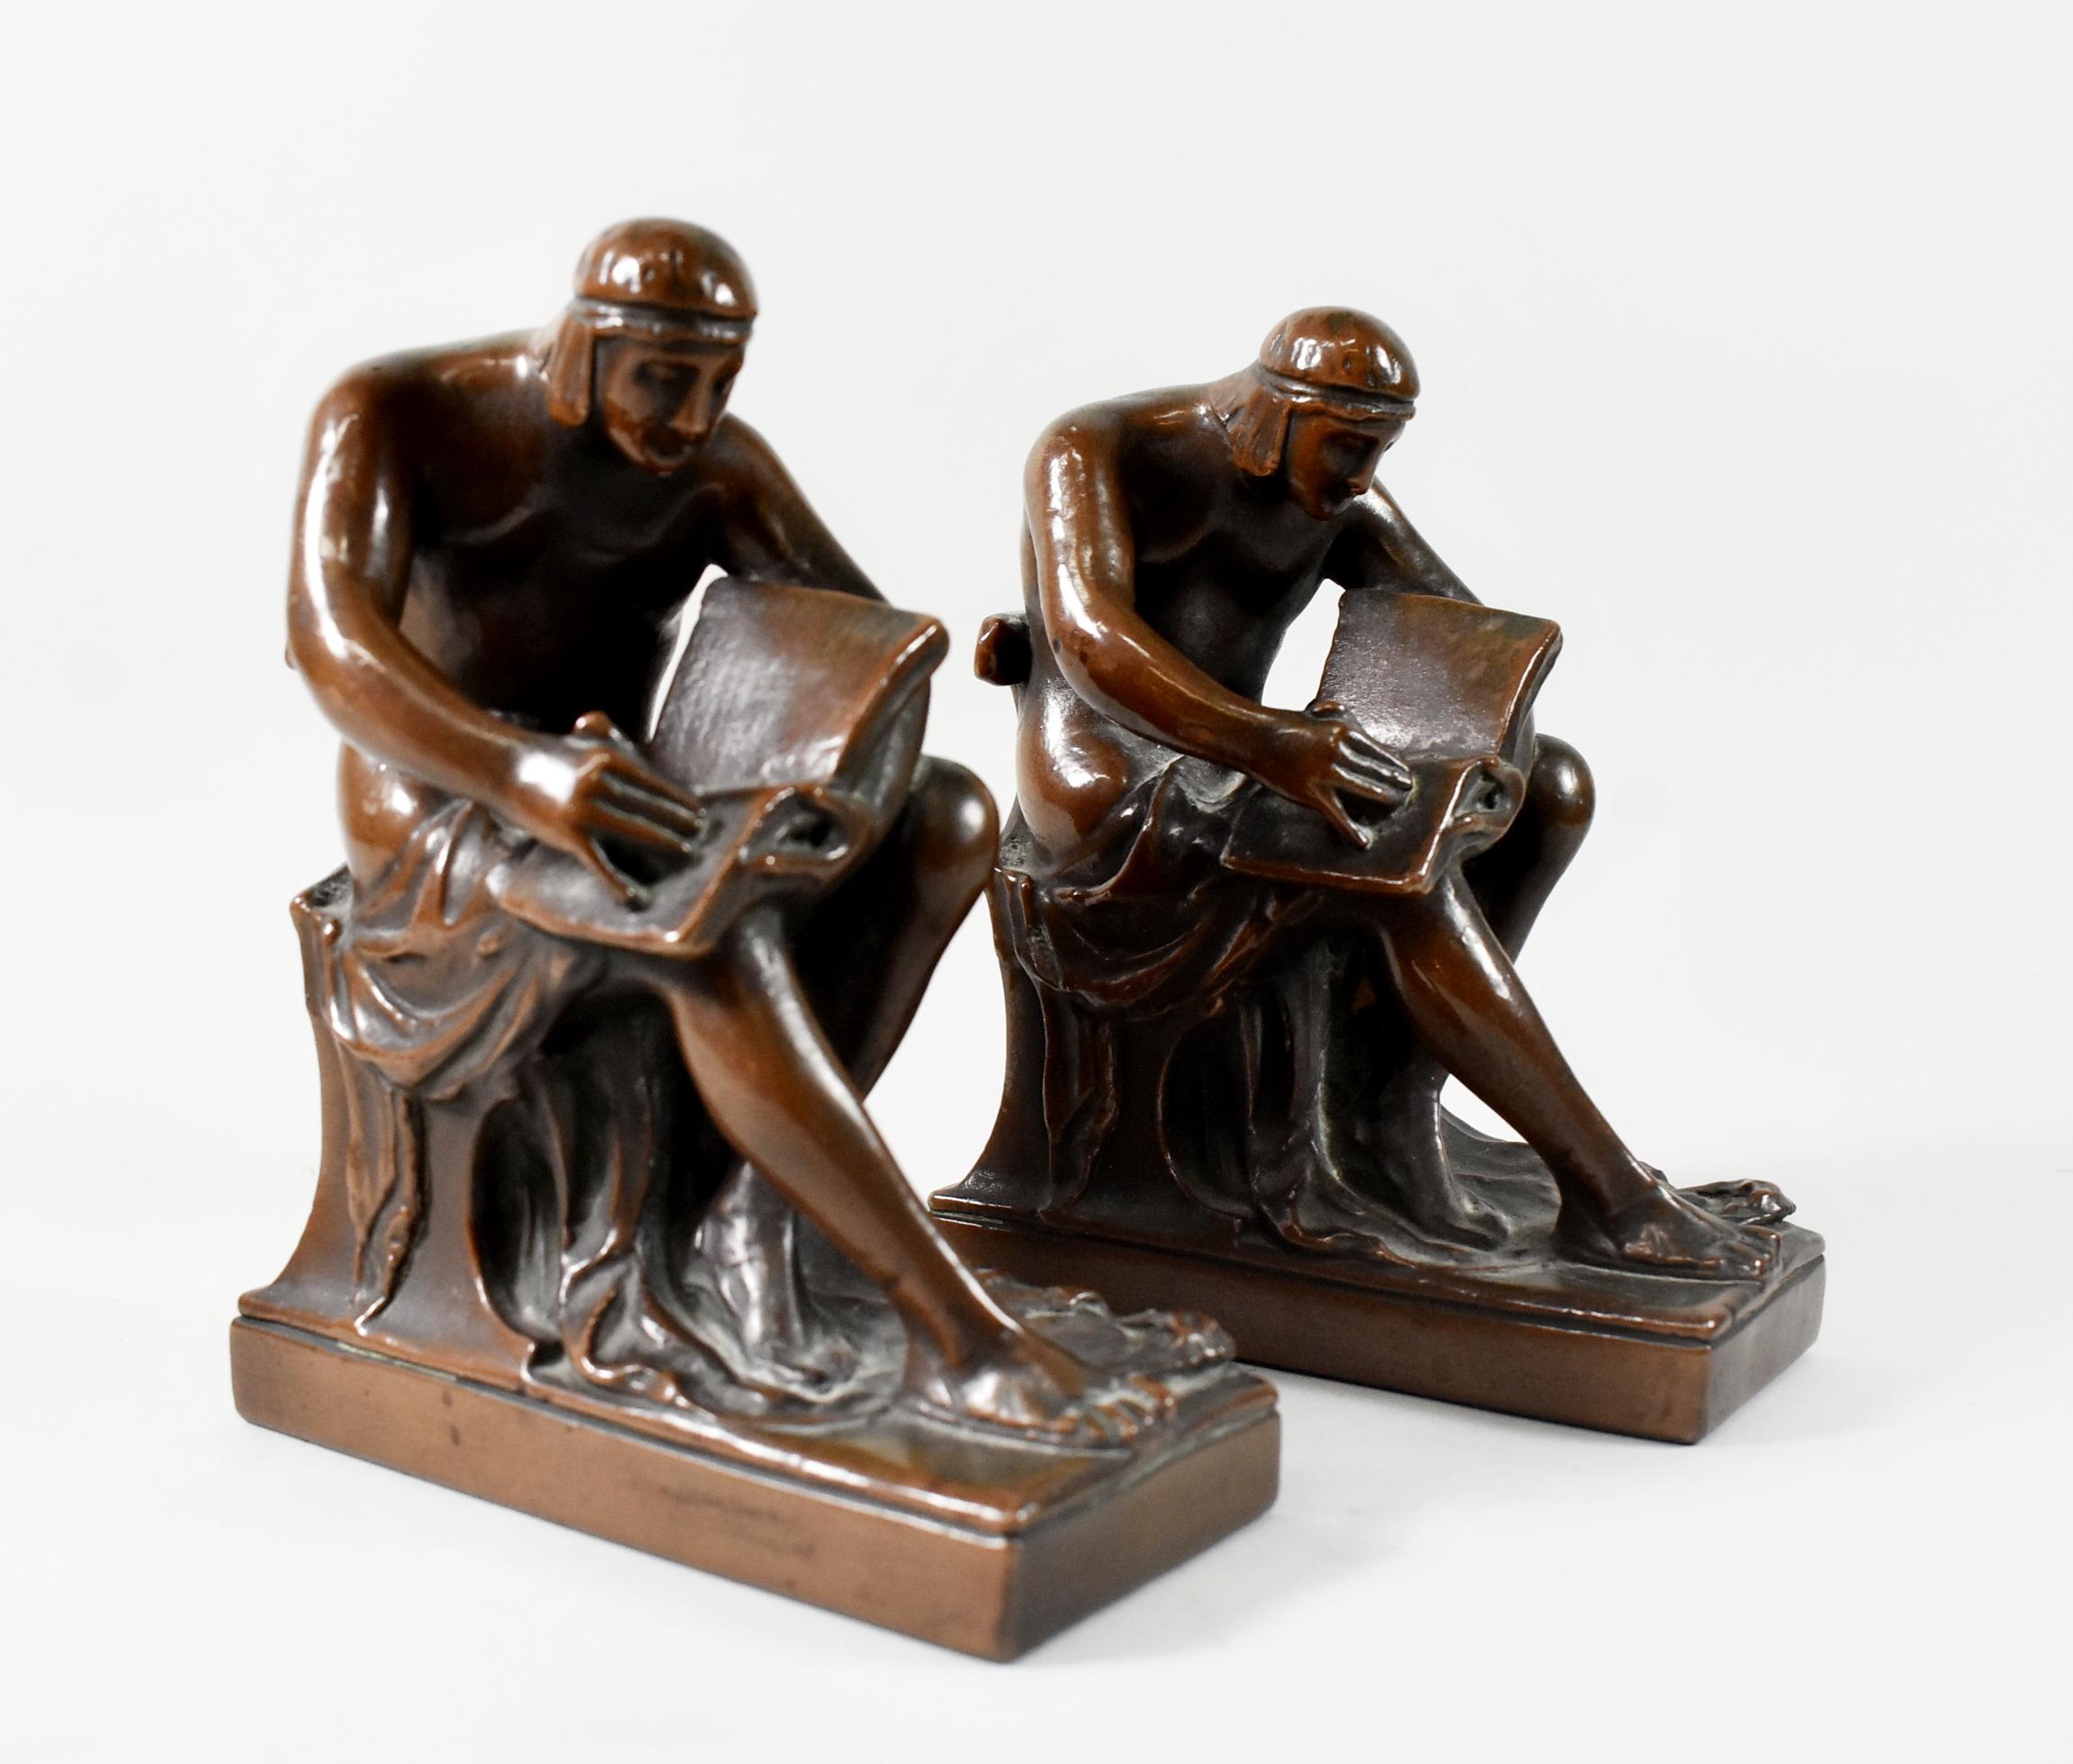 Pompeiian Bronze Co bronze clad figural bookends circa 1920's. Depiction of a seated man with a book.